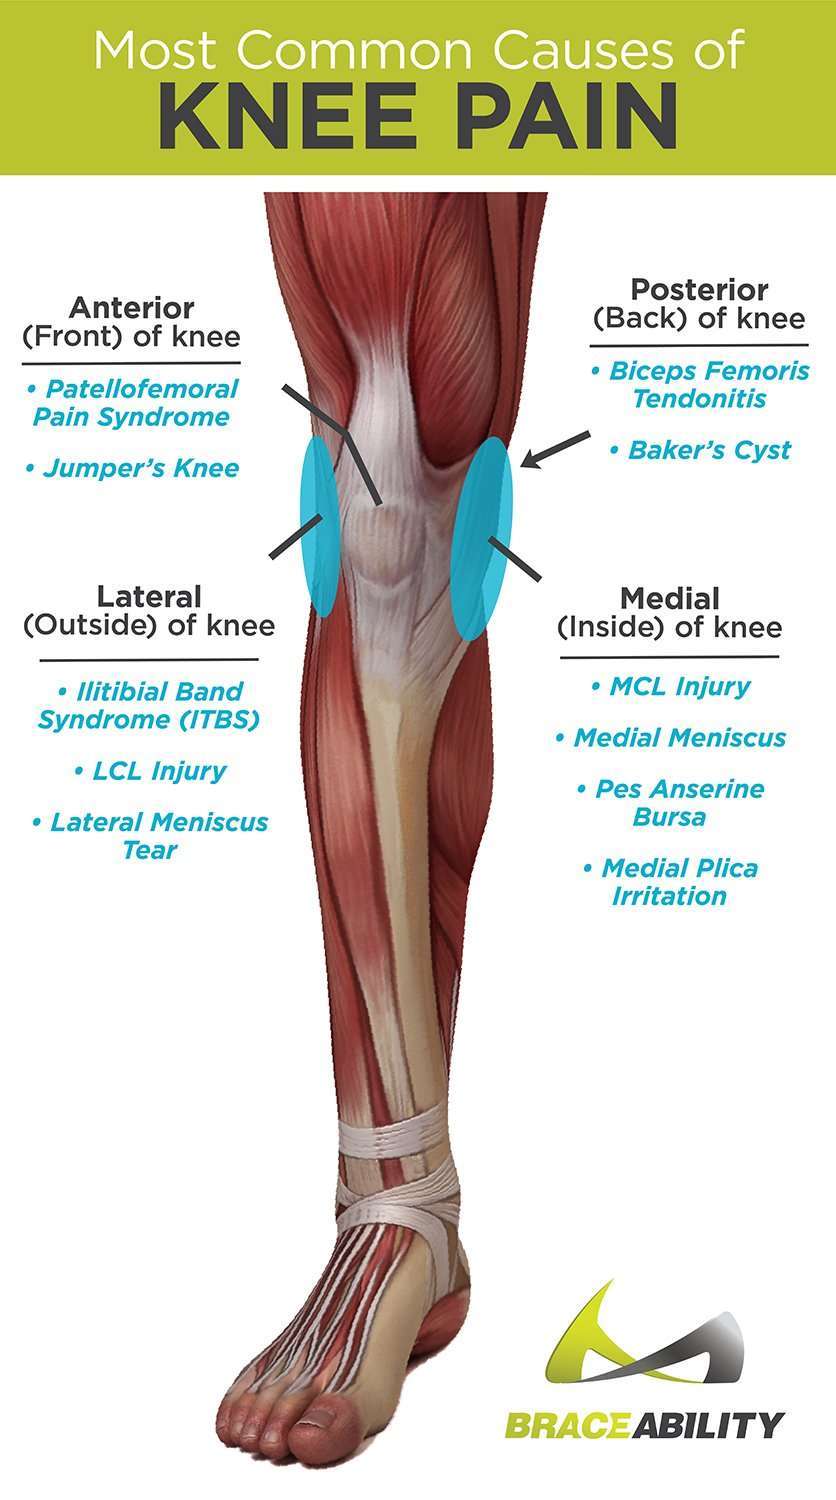 Types of Knee Pain: Anterior, Posterior, Medial, &  Lateral